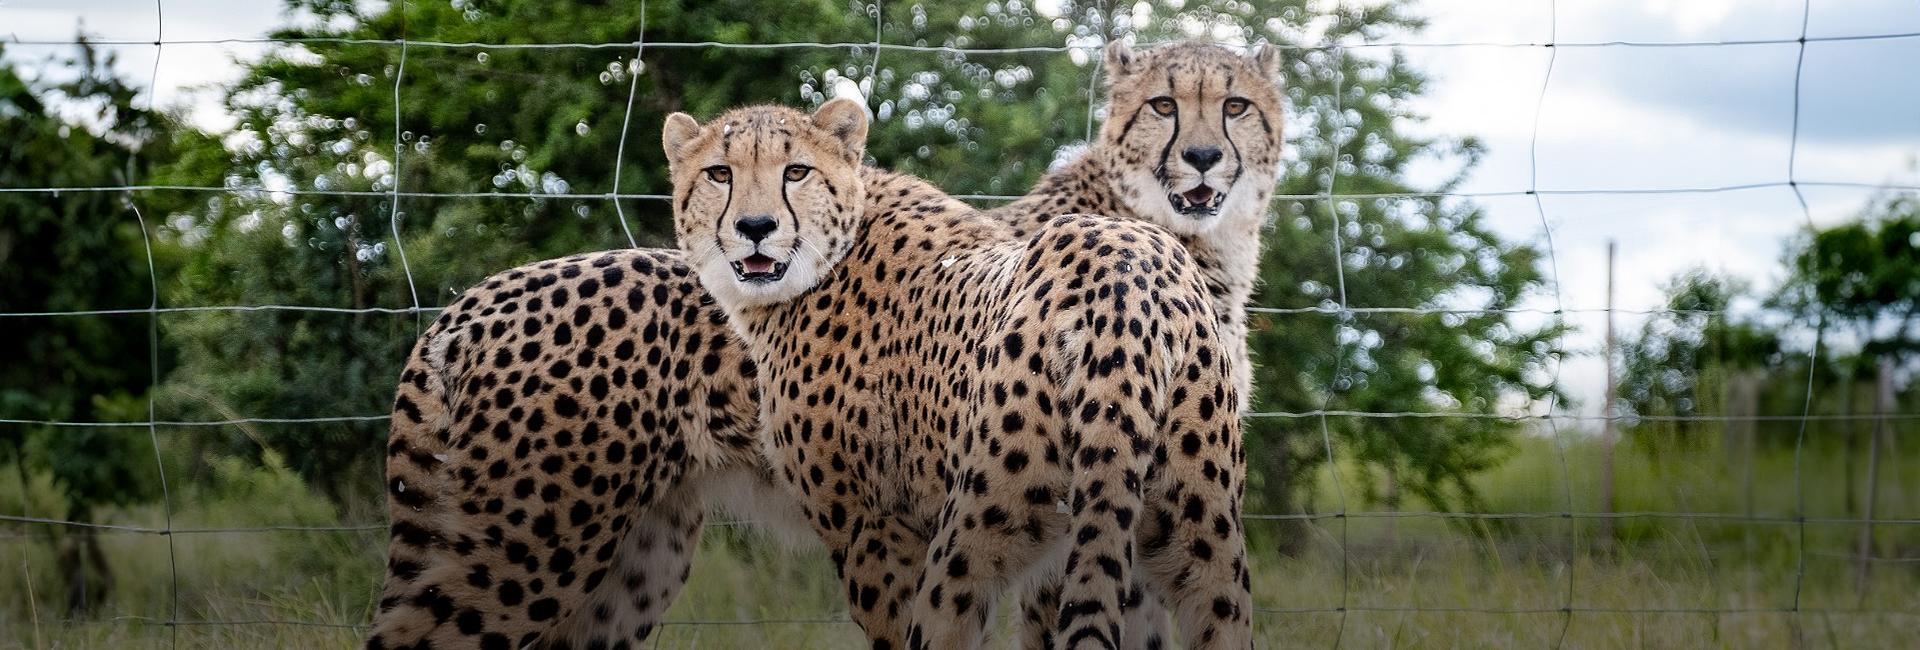 From Canada to Zimbabwe, Two Cheetahs Successfully Rewilded!